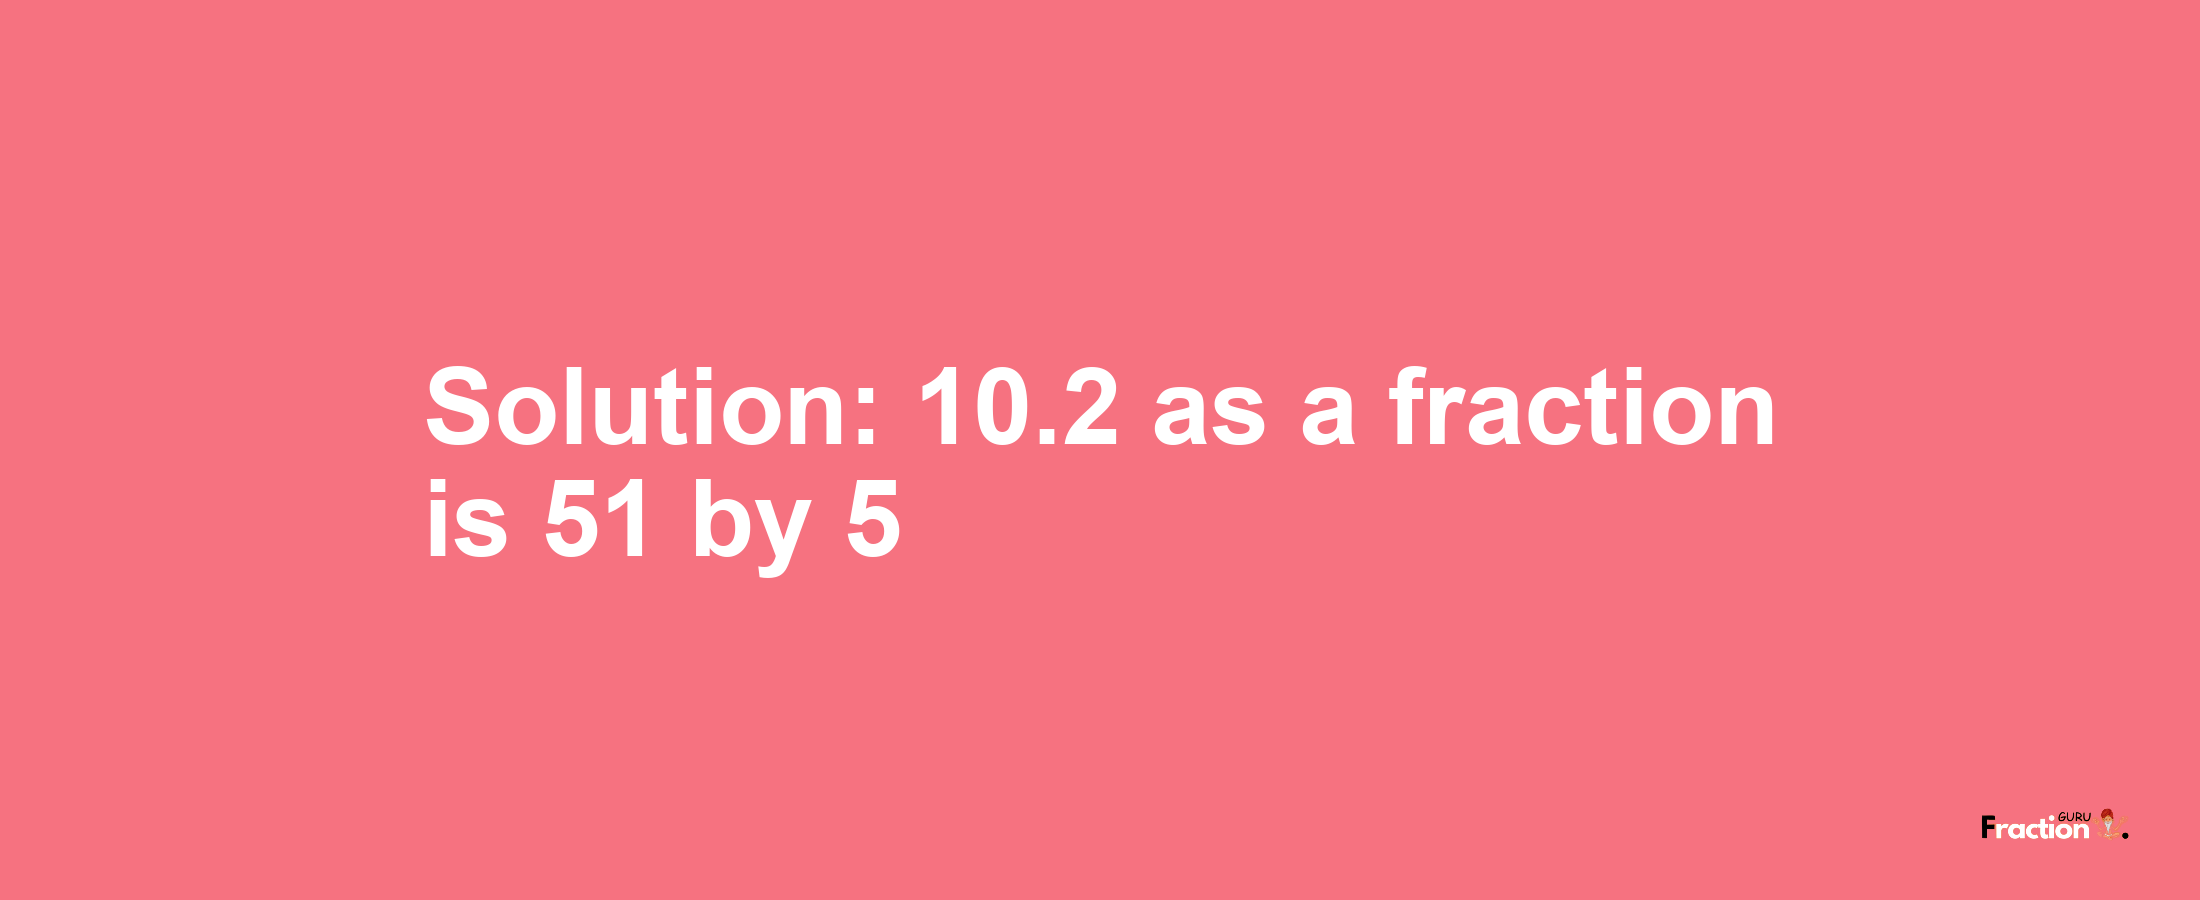 Solution:10.2 as a fraction is 51/5